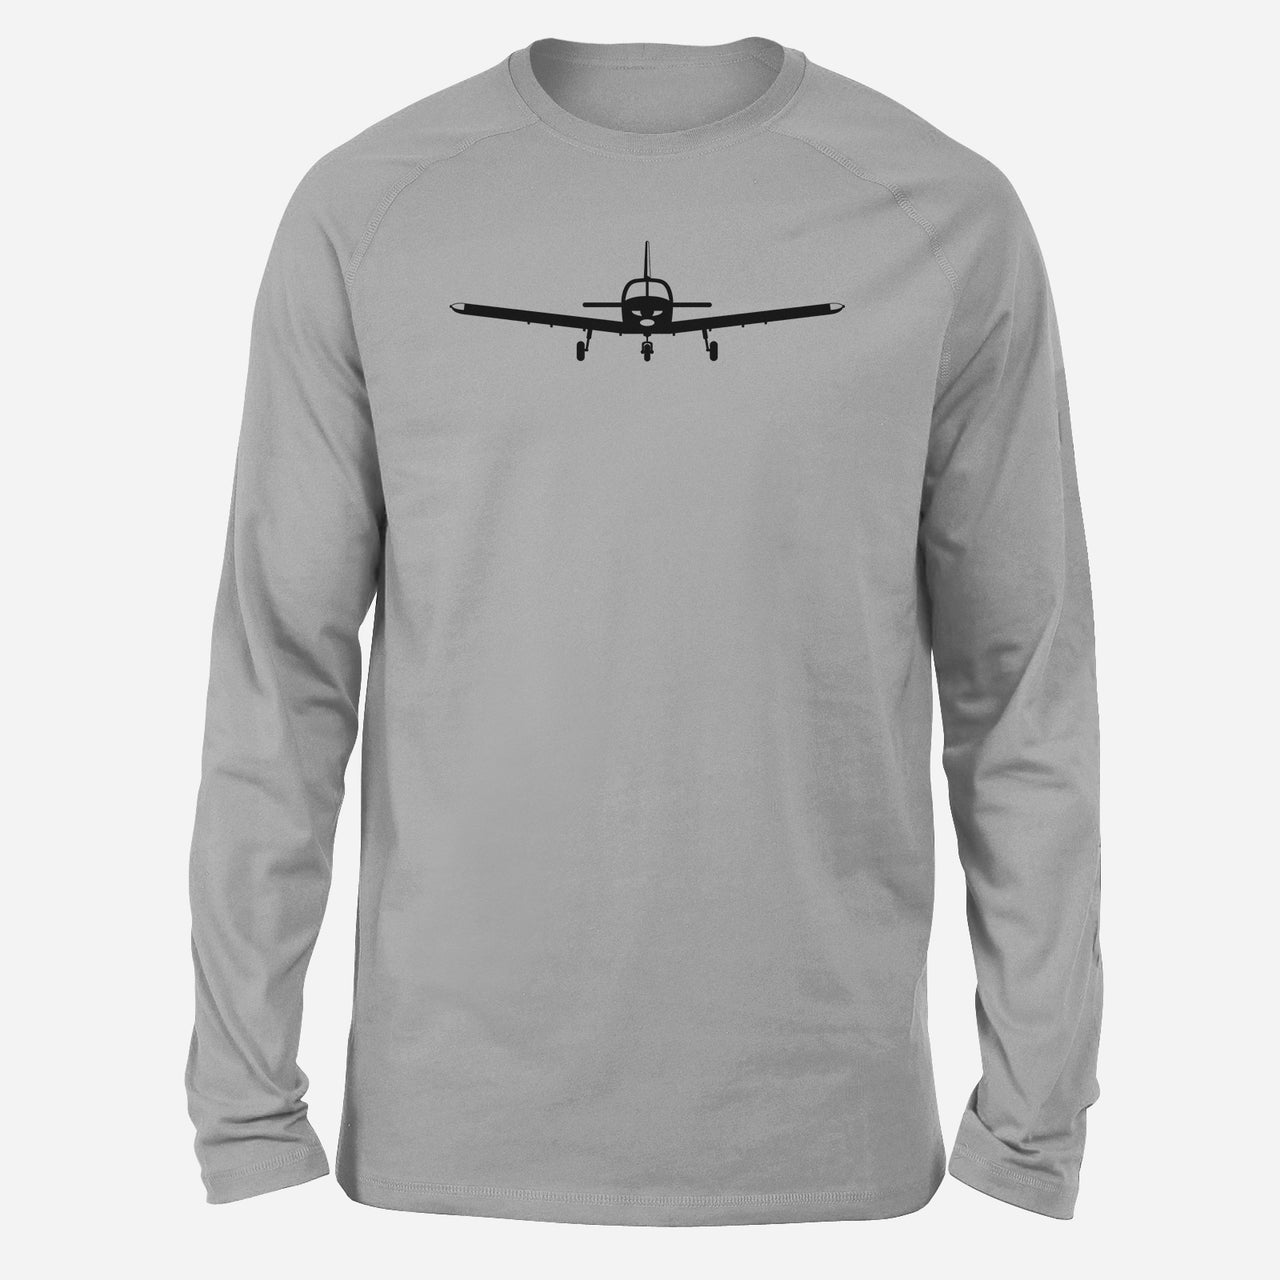 Piper PA28 Silhouette Plane Designed Long-Sleeve T-Shirts